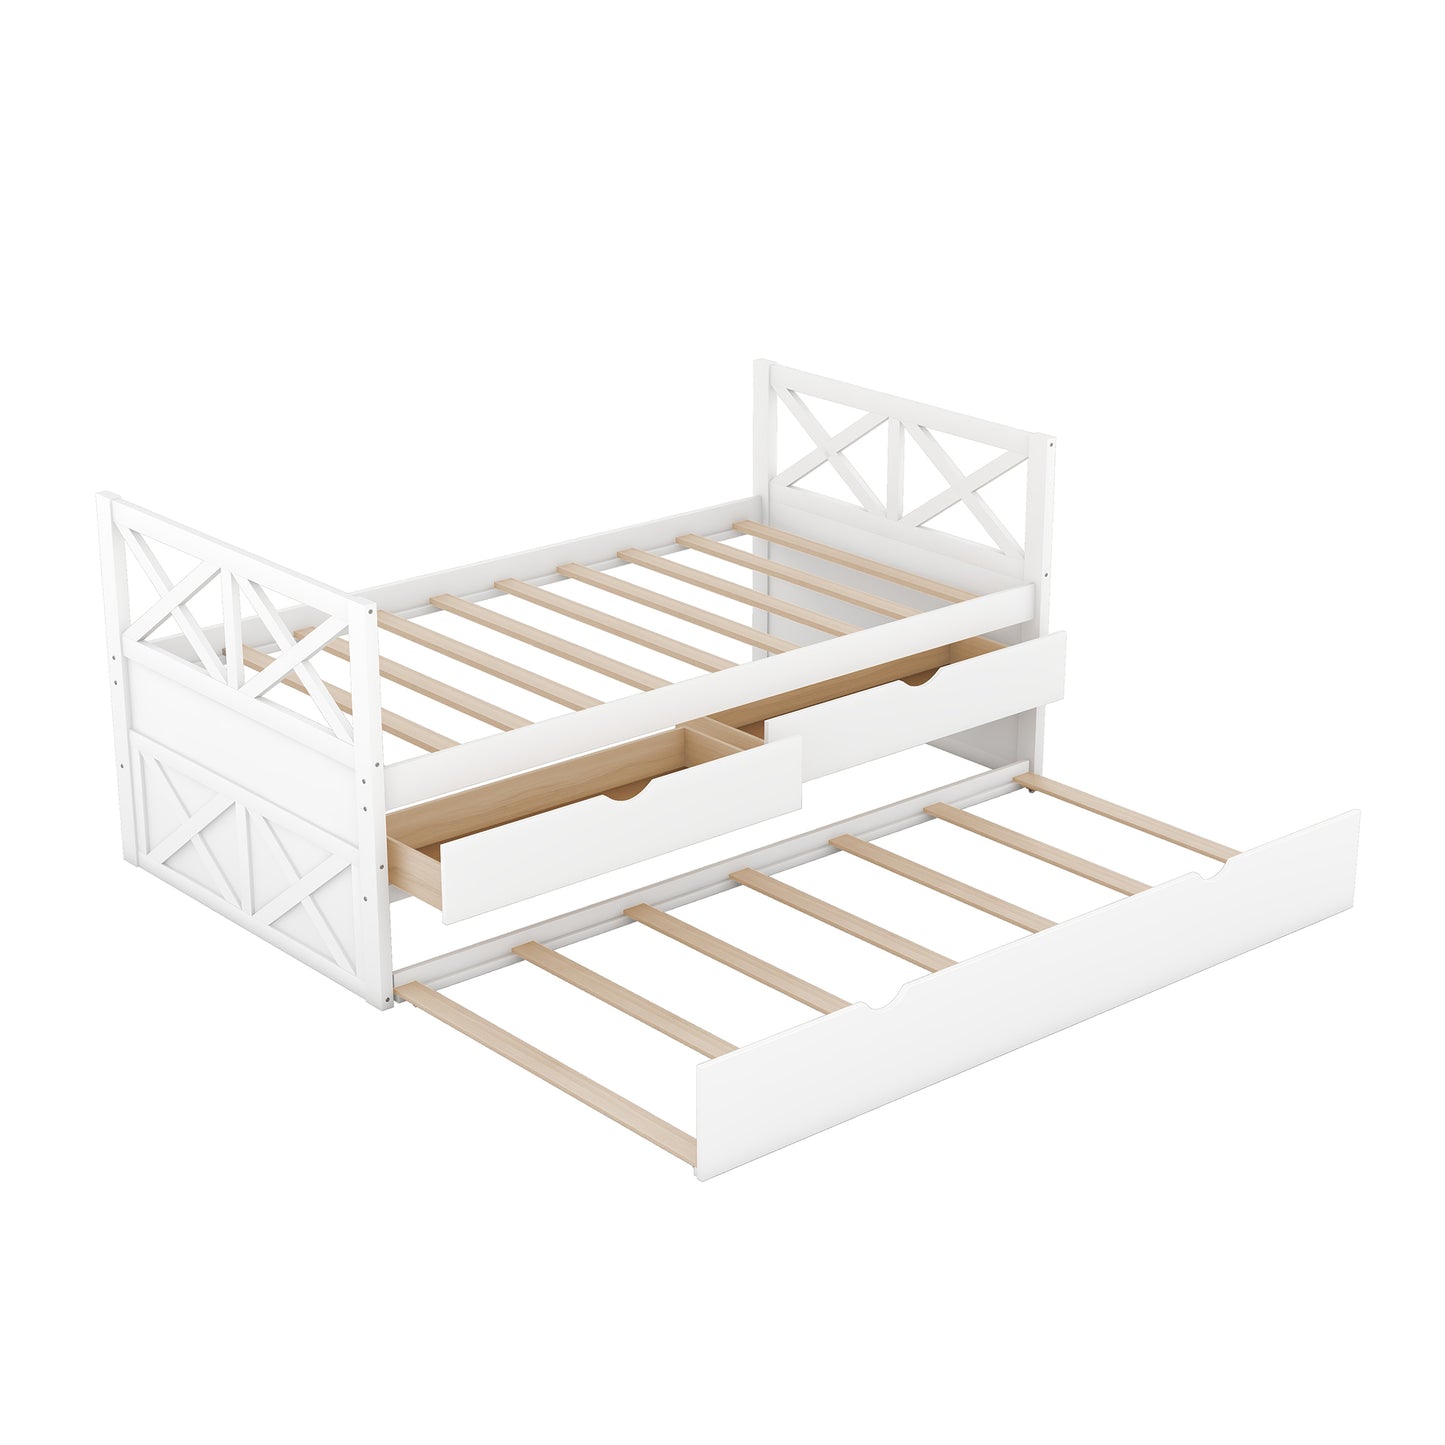 Multi-Functional Daybed with Drawers and Trundle, White